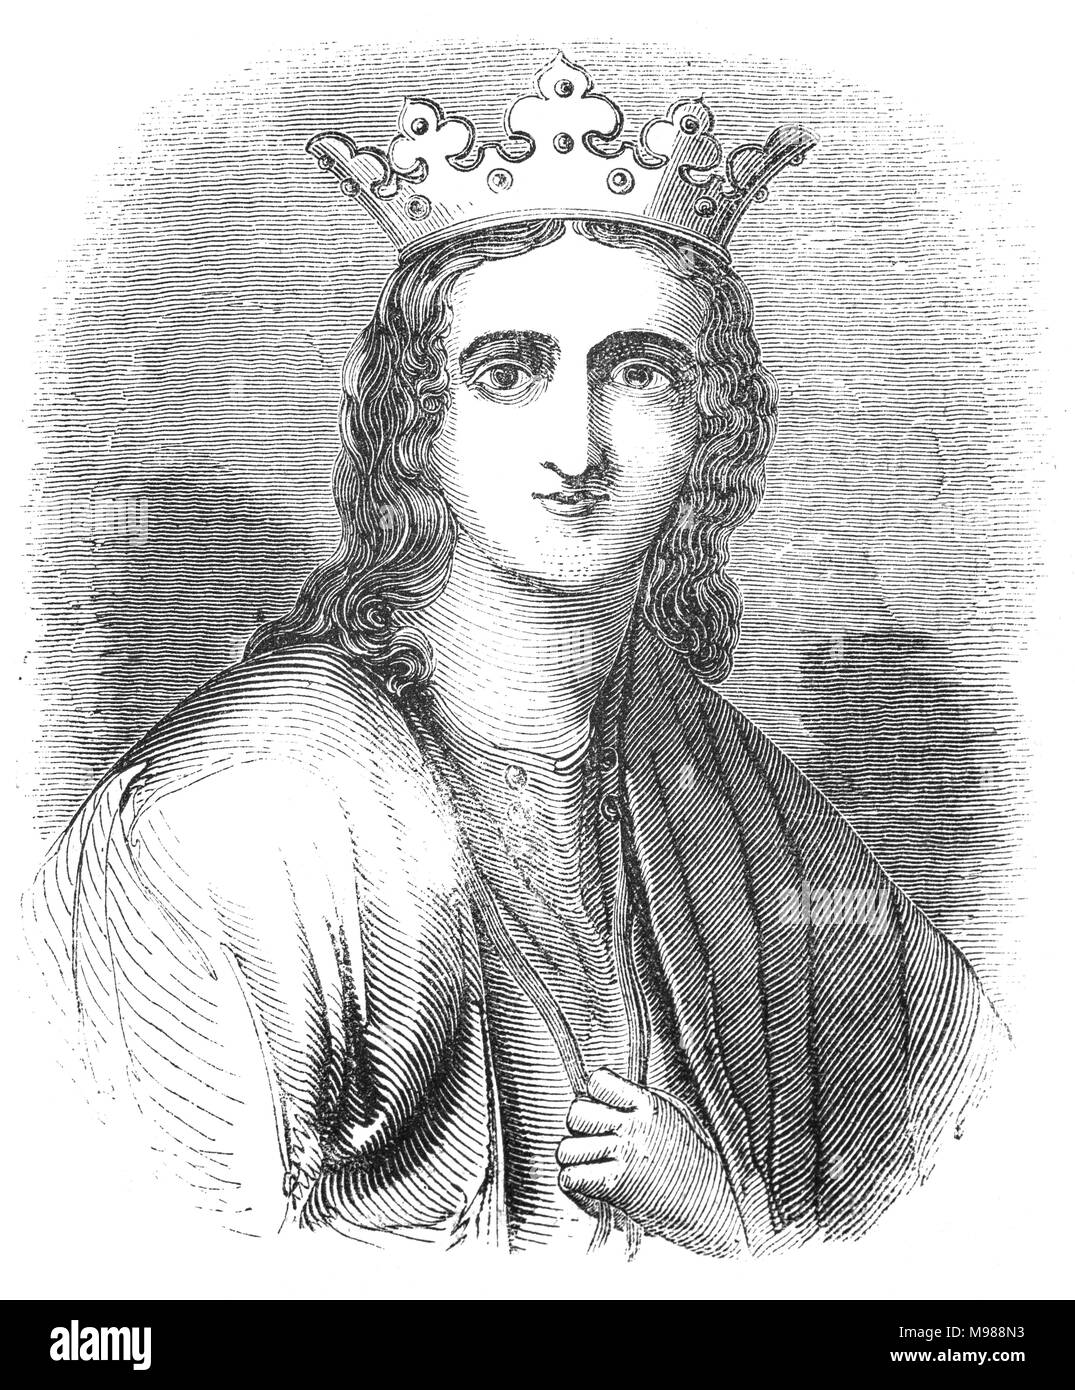 Queen Eleanor of Castile (1241 – 1290), the first wife of Edward I, whom she married as part of a political deal to affirm English sovereignty over Gascony. She was better educated than most medieval queens and exerted a strong cultural influence over England. She was a keen patron of literature, and encouraged the use of tapestries, carpets and tableware in the Spanish style, as well as innovative garden designs. She died in the village of Harby, Nottinghamshire, near Lincoln  after piously receiving the Church's last rites, she died there on the evening of the 28 November 1290, aged 49 and a Stock Photo